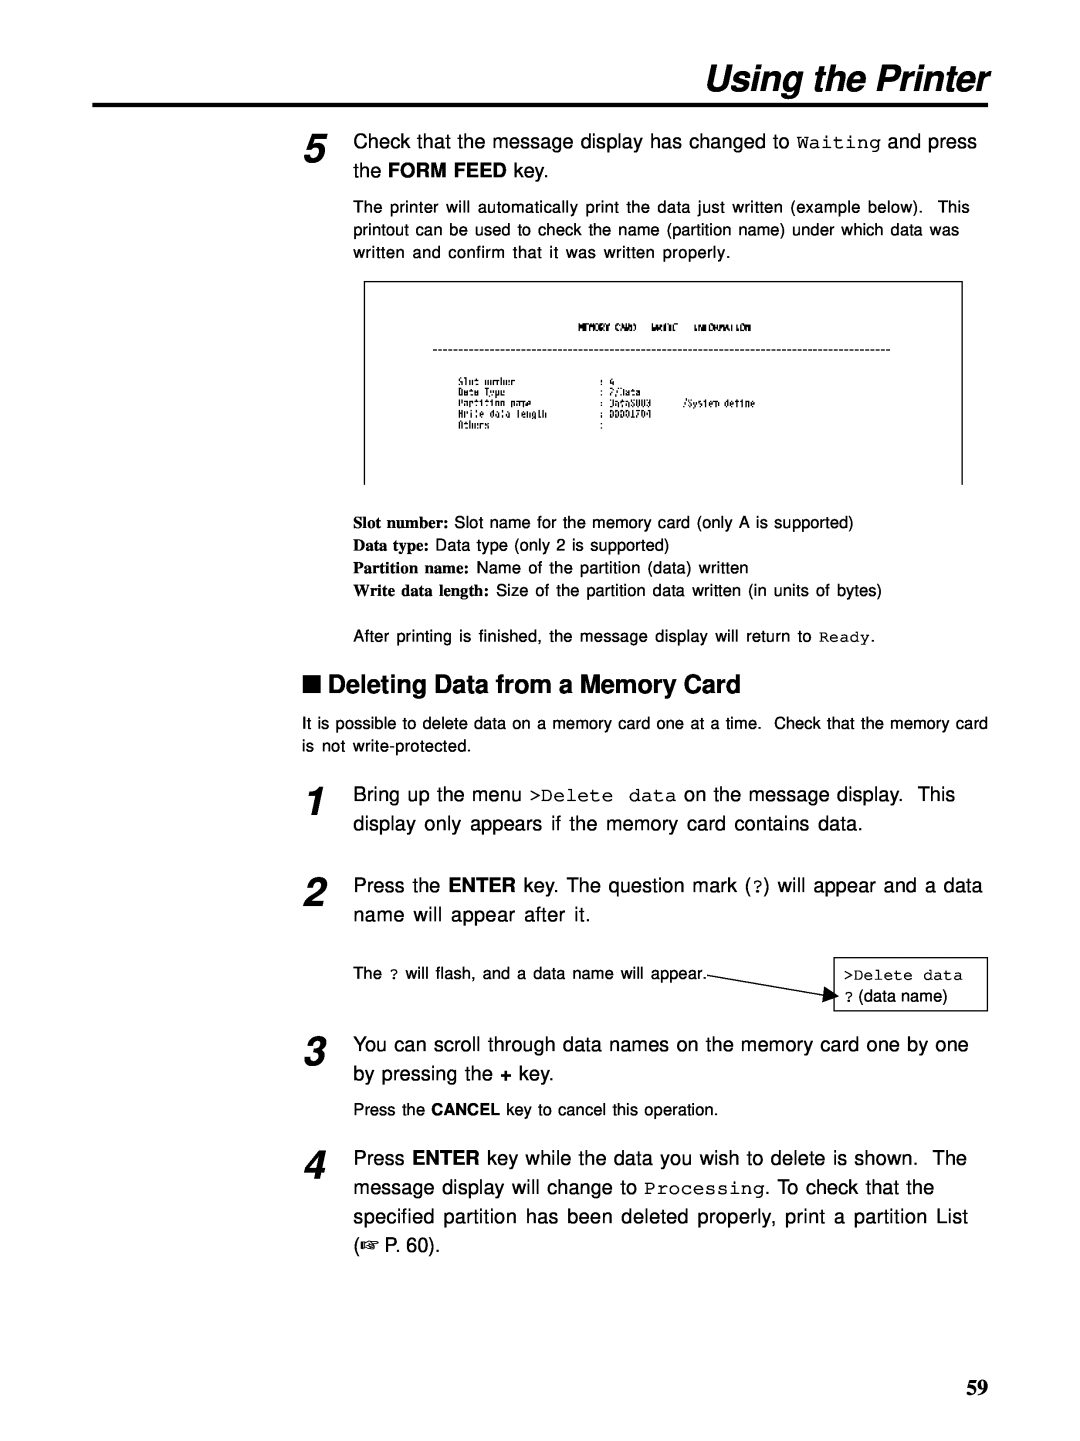 HP Ci 1100 manual Deleting Data from a Memory Card, Using the Printer 